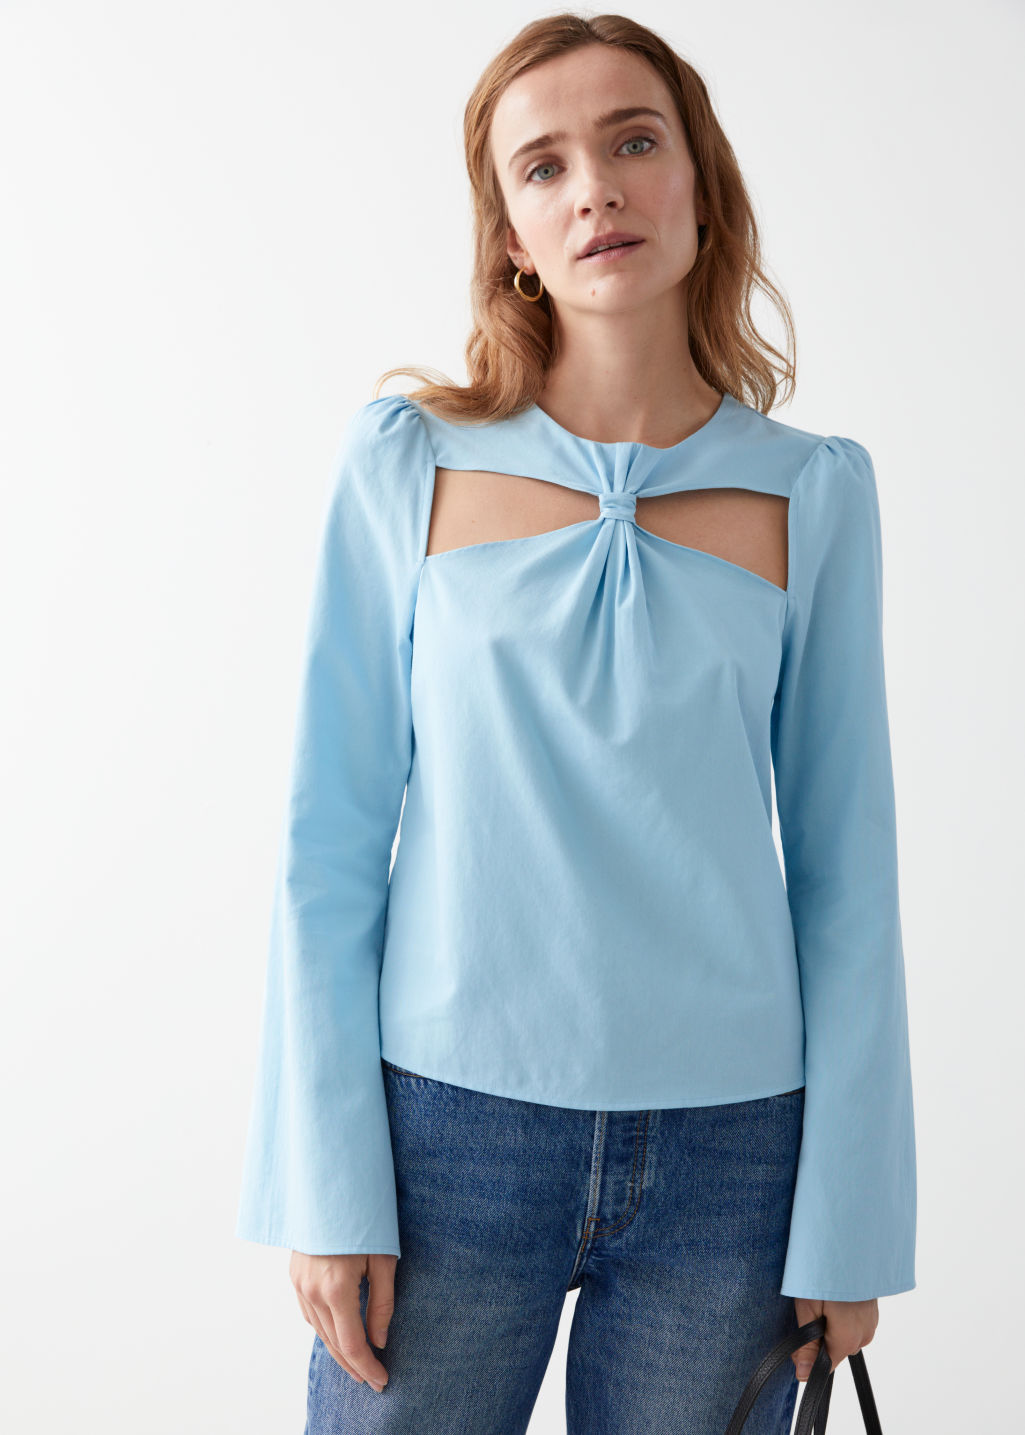 Twist Detail Cut Out Top - Light Blue - Tops & T-shirts - & Other Stories